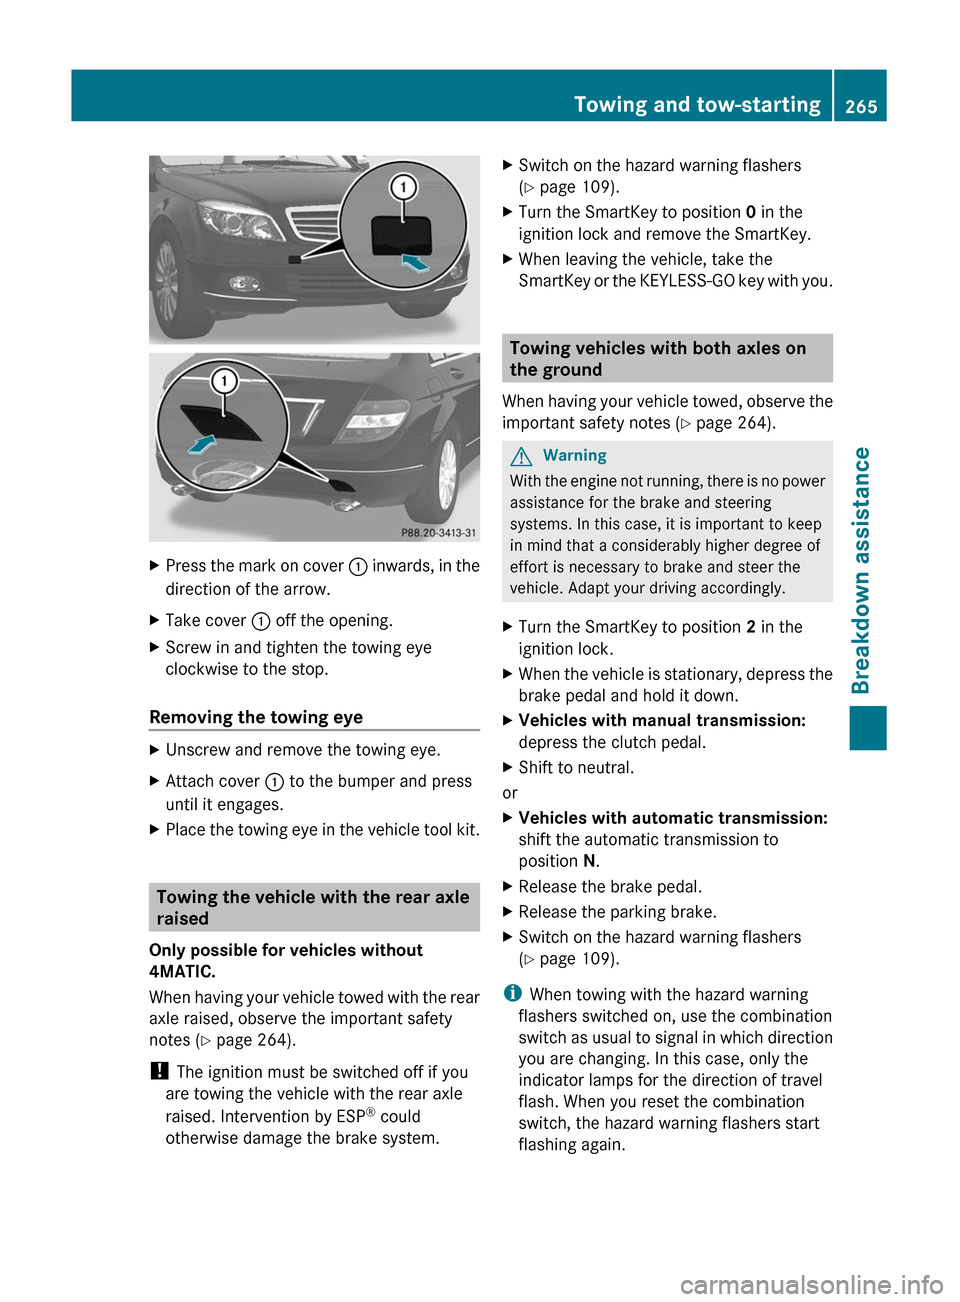 MERCEDES-BENZ C-Class 2011 W204 Workshop Manual XPress the mark on cover : inwards, in the
direction of the arrow.
XTake cover : off the opening.XScrew in and tighten the towing eye
clockwise to the stop.
Removing the towing eye 
XUnscrew and remov